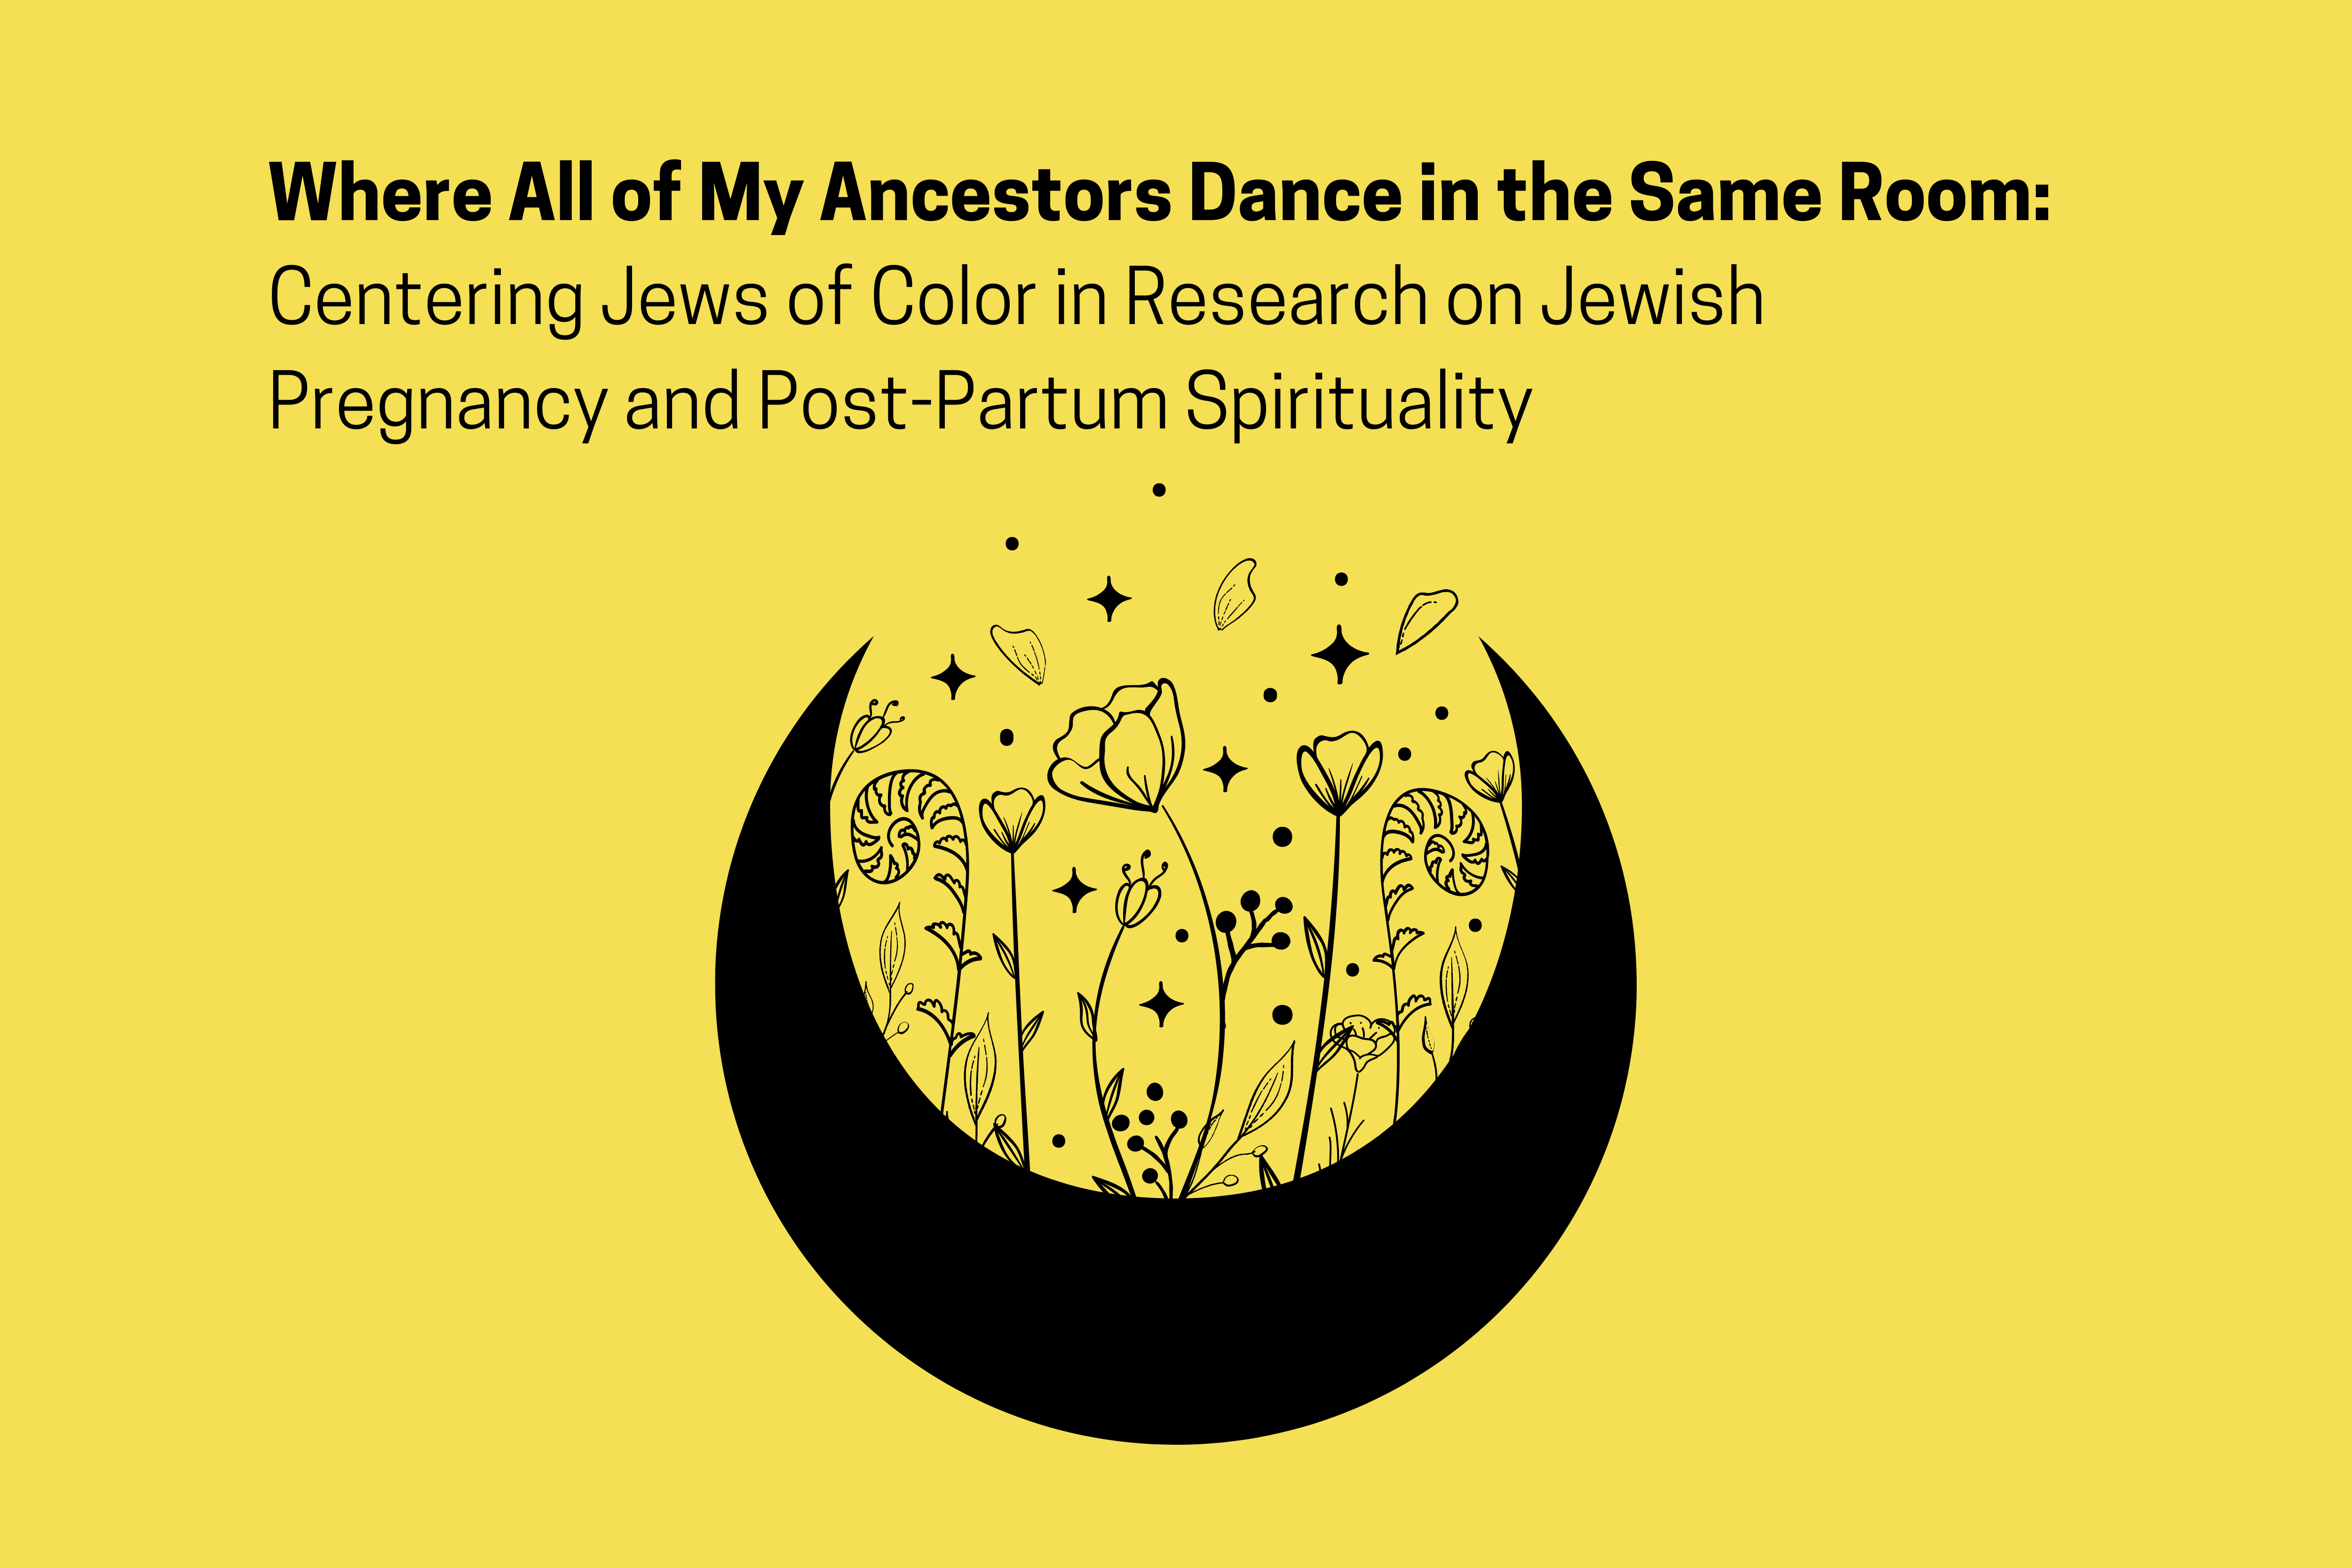 Where all of my ancestors dance in the same room: Centering Jews of Color in Research on Jewish Pregnancy and Post-Partum Spirituality